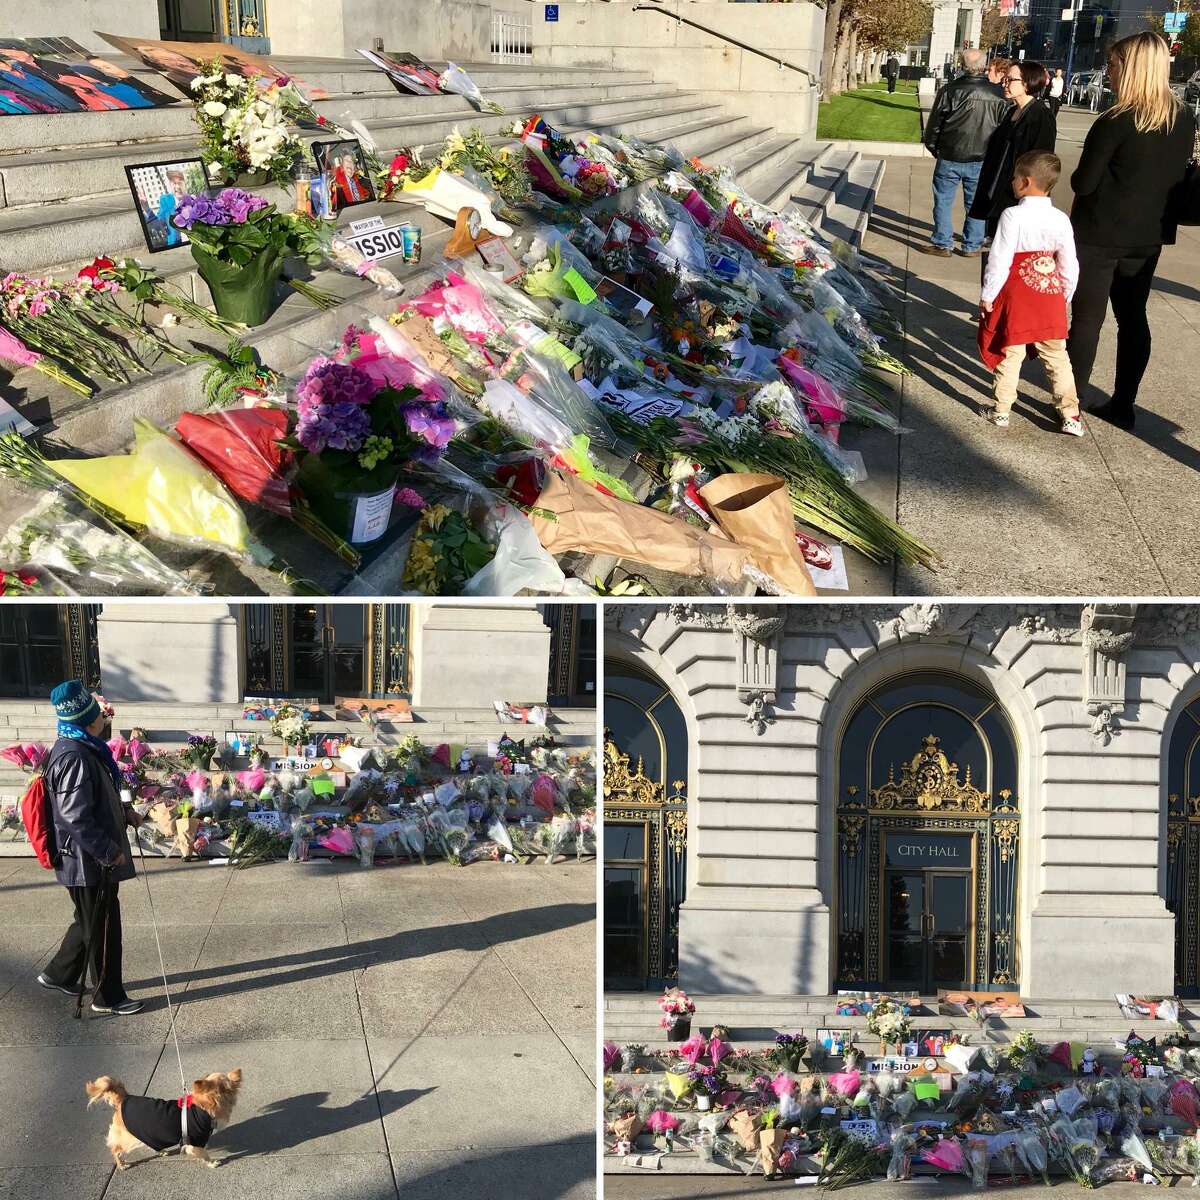 A memorial for Mayor Ed Lee continues to grow as mourners leave flowers, notes and photos on the steps of San Francisco City Hall.